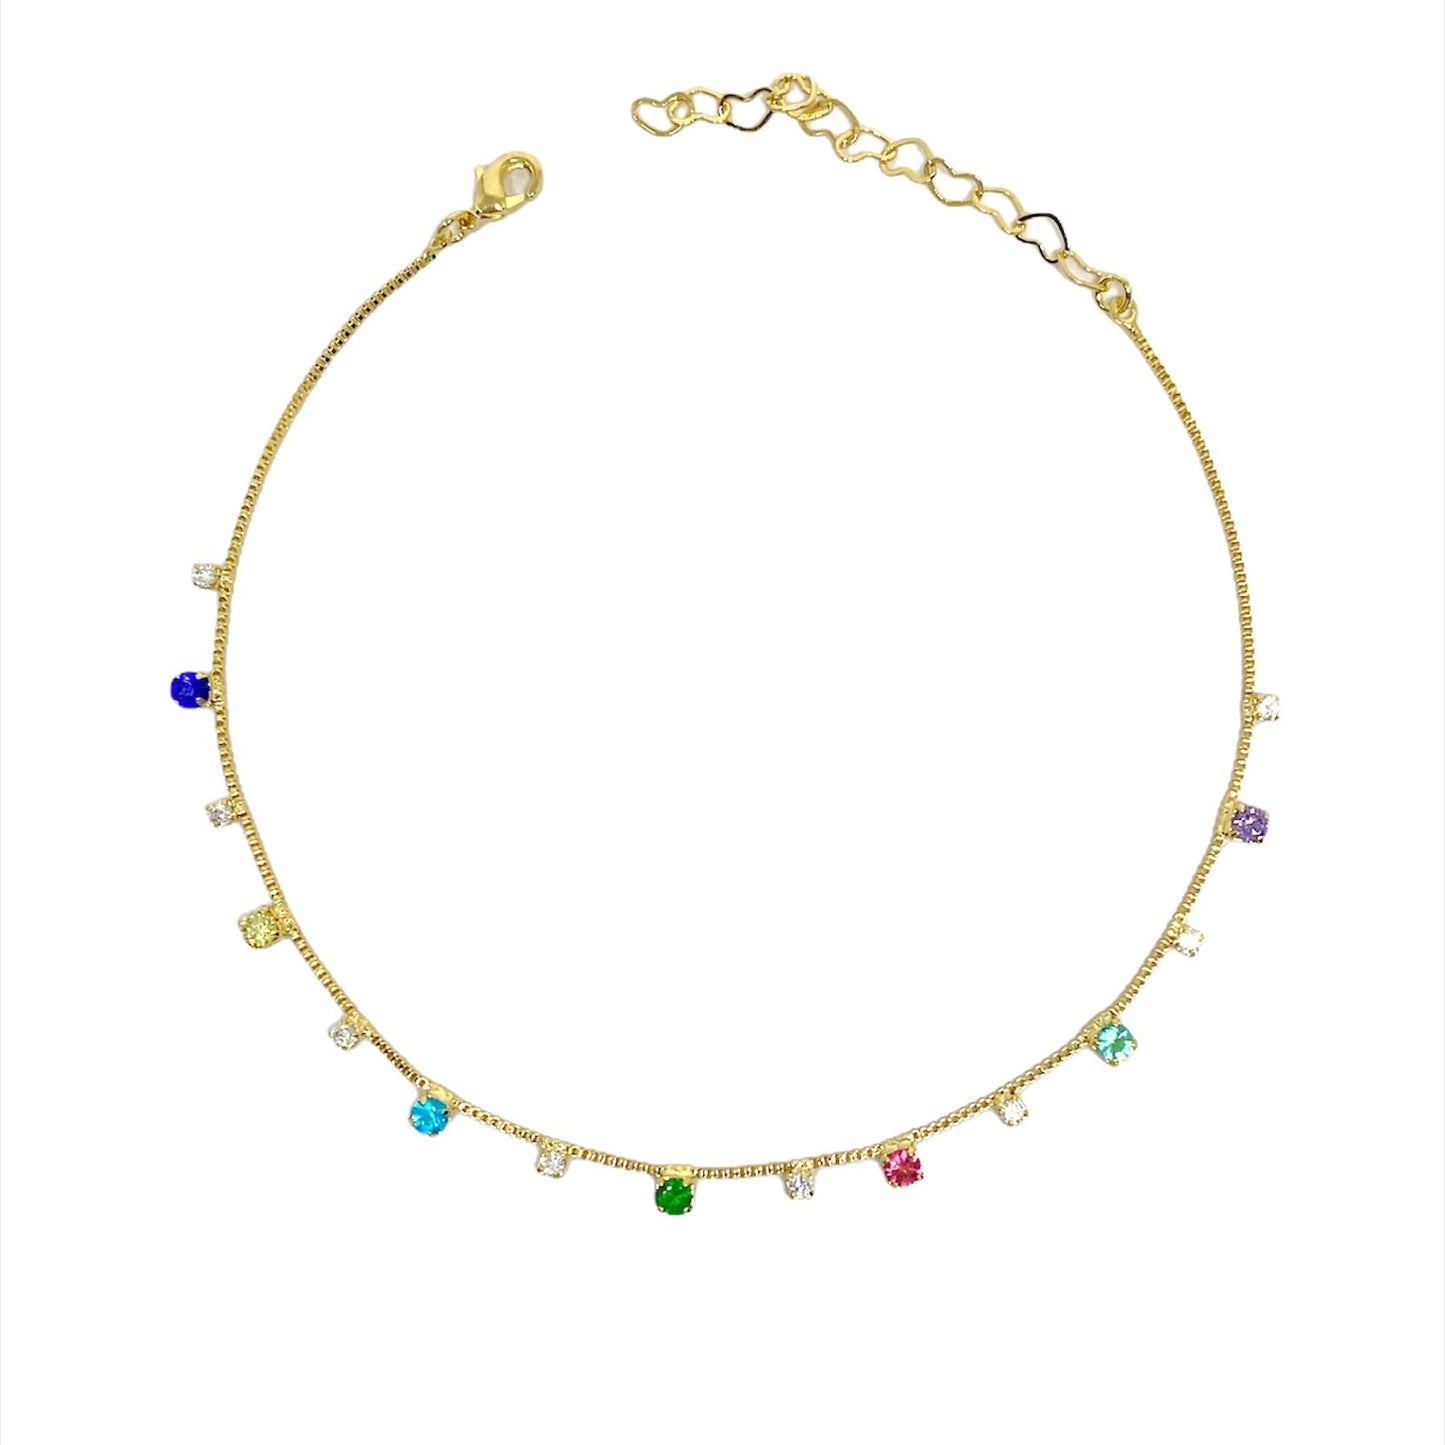 GoldFi Handmade Colorful Micro Cubic Zirconia Anklet 18k Gold Filled Wholesale